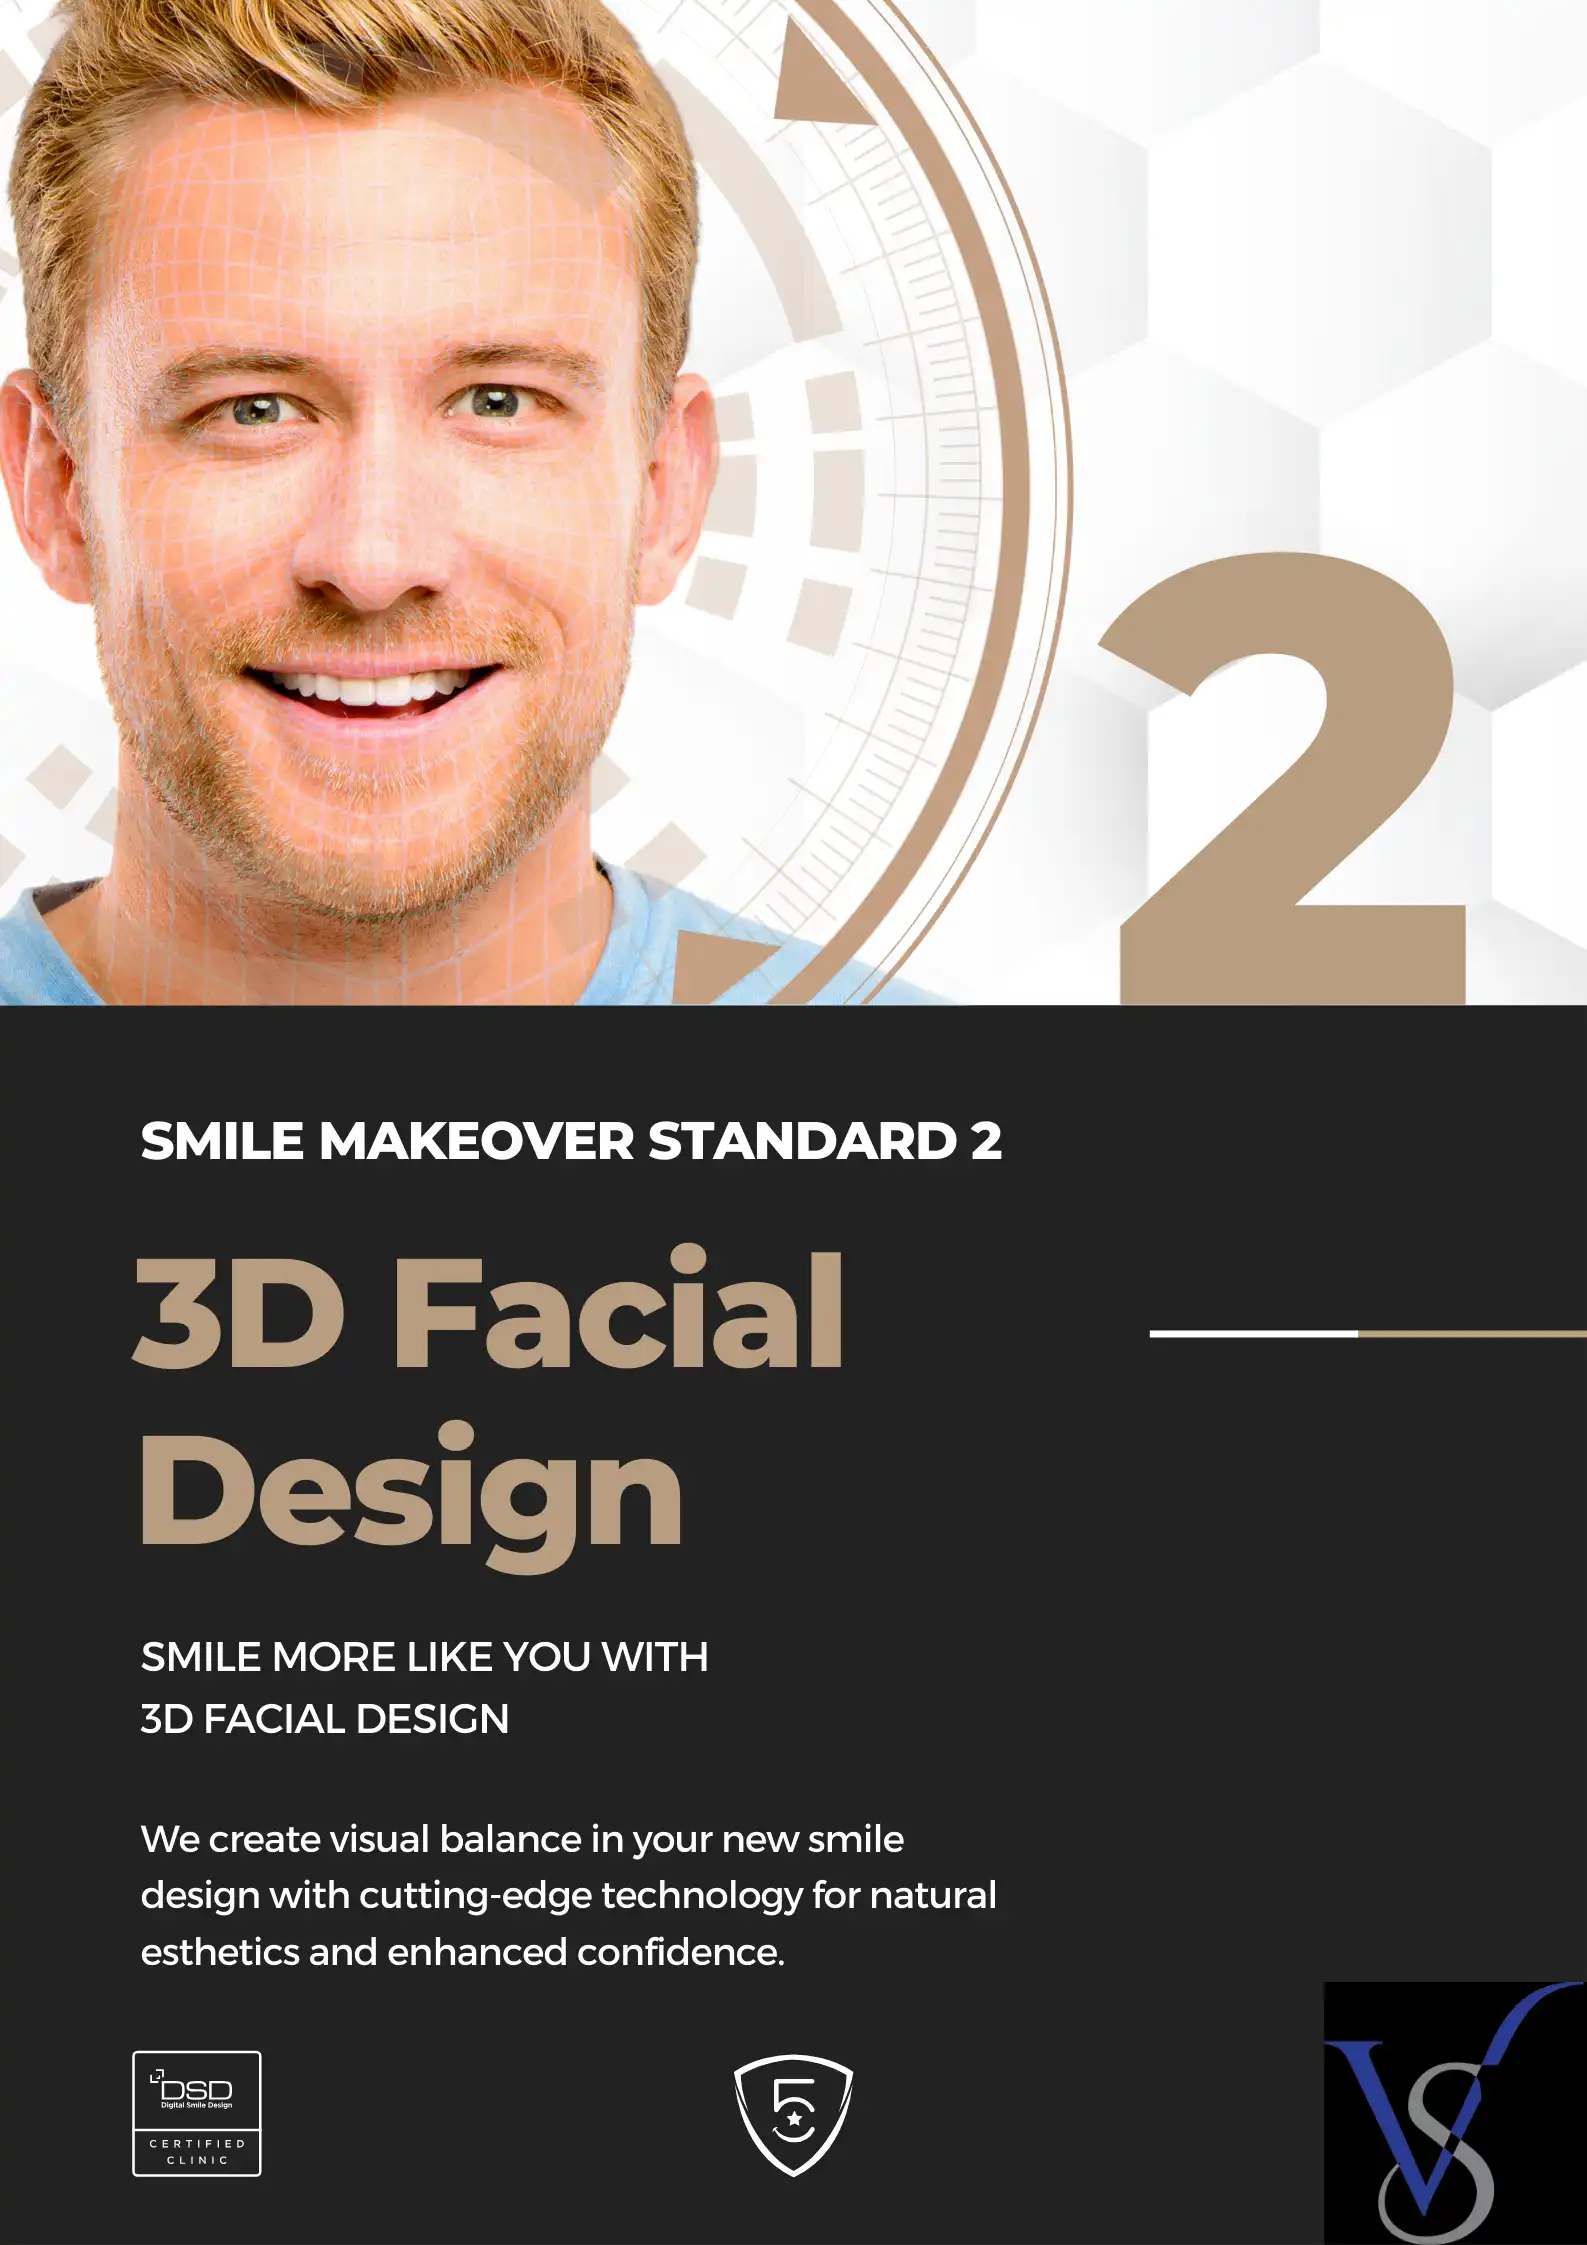 SMILE MAKEOVER STANDARD 2: SMILE MORE LIKE YOU WITH 3D FACIAL DESIGN We create visual balance in your new smile design with cutting-edge technology for natural aesthetics and enhanced confidence.